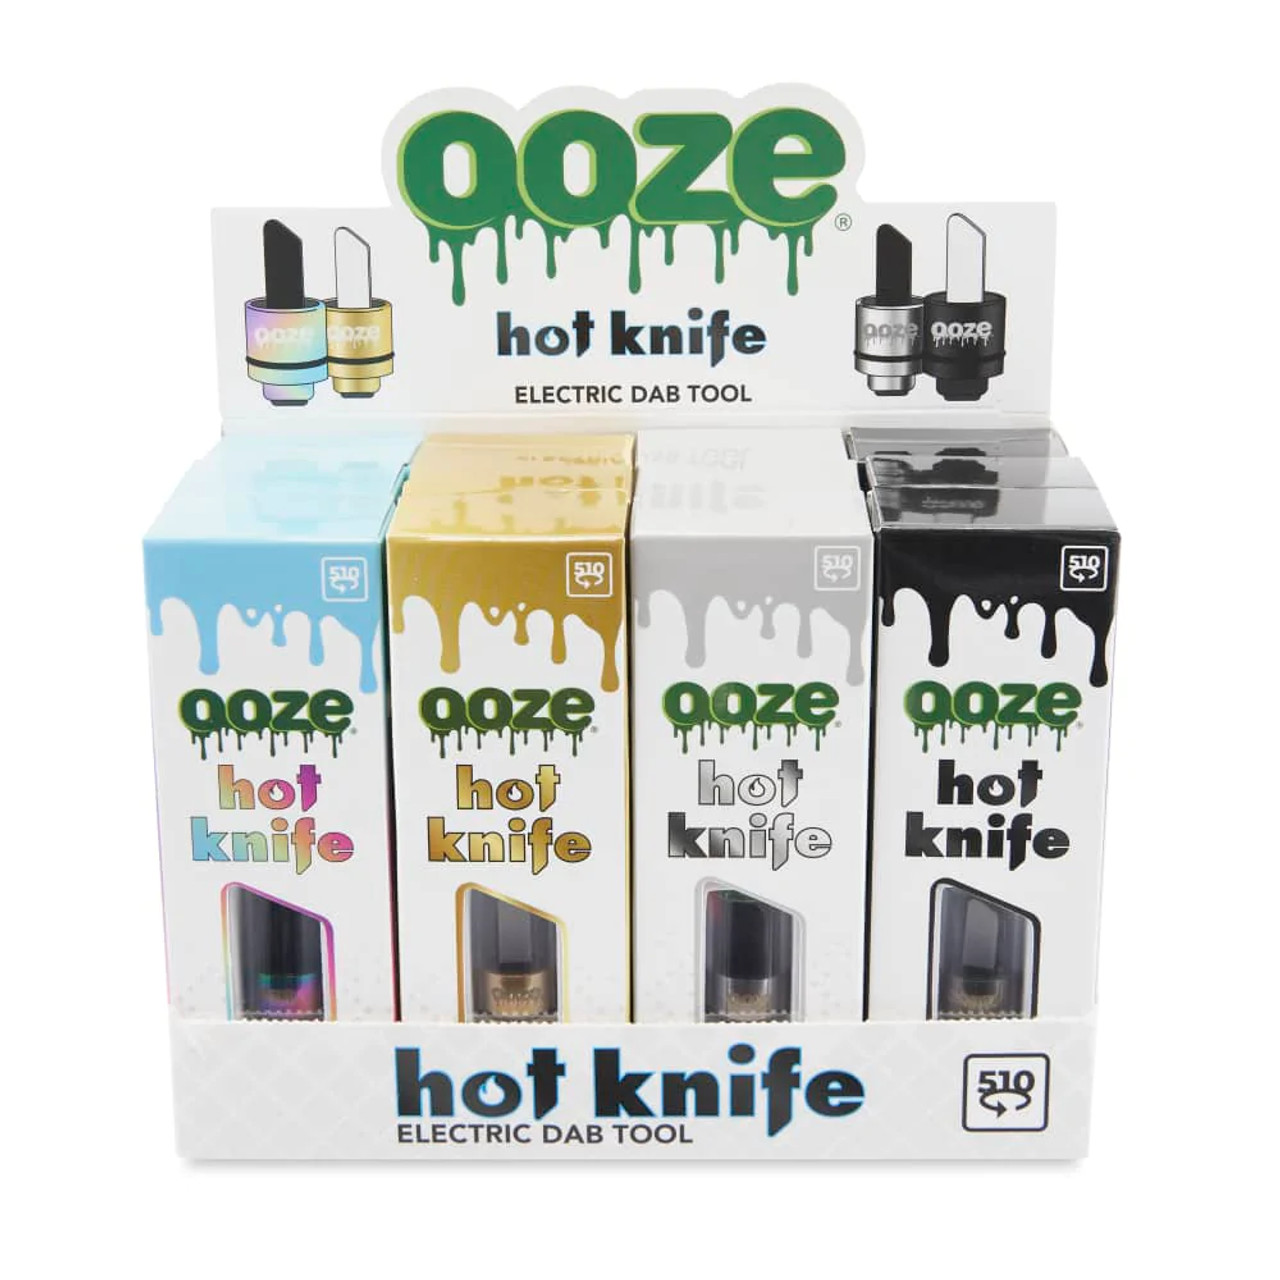 Ooze Hot Knife 510 Thread Electric Dab Tool POP | 12pc Display | Assorted Colors